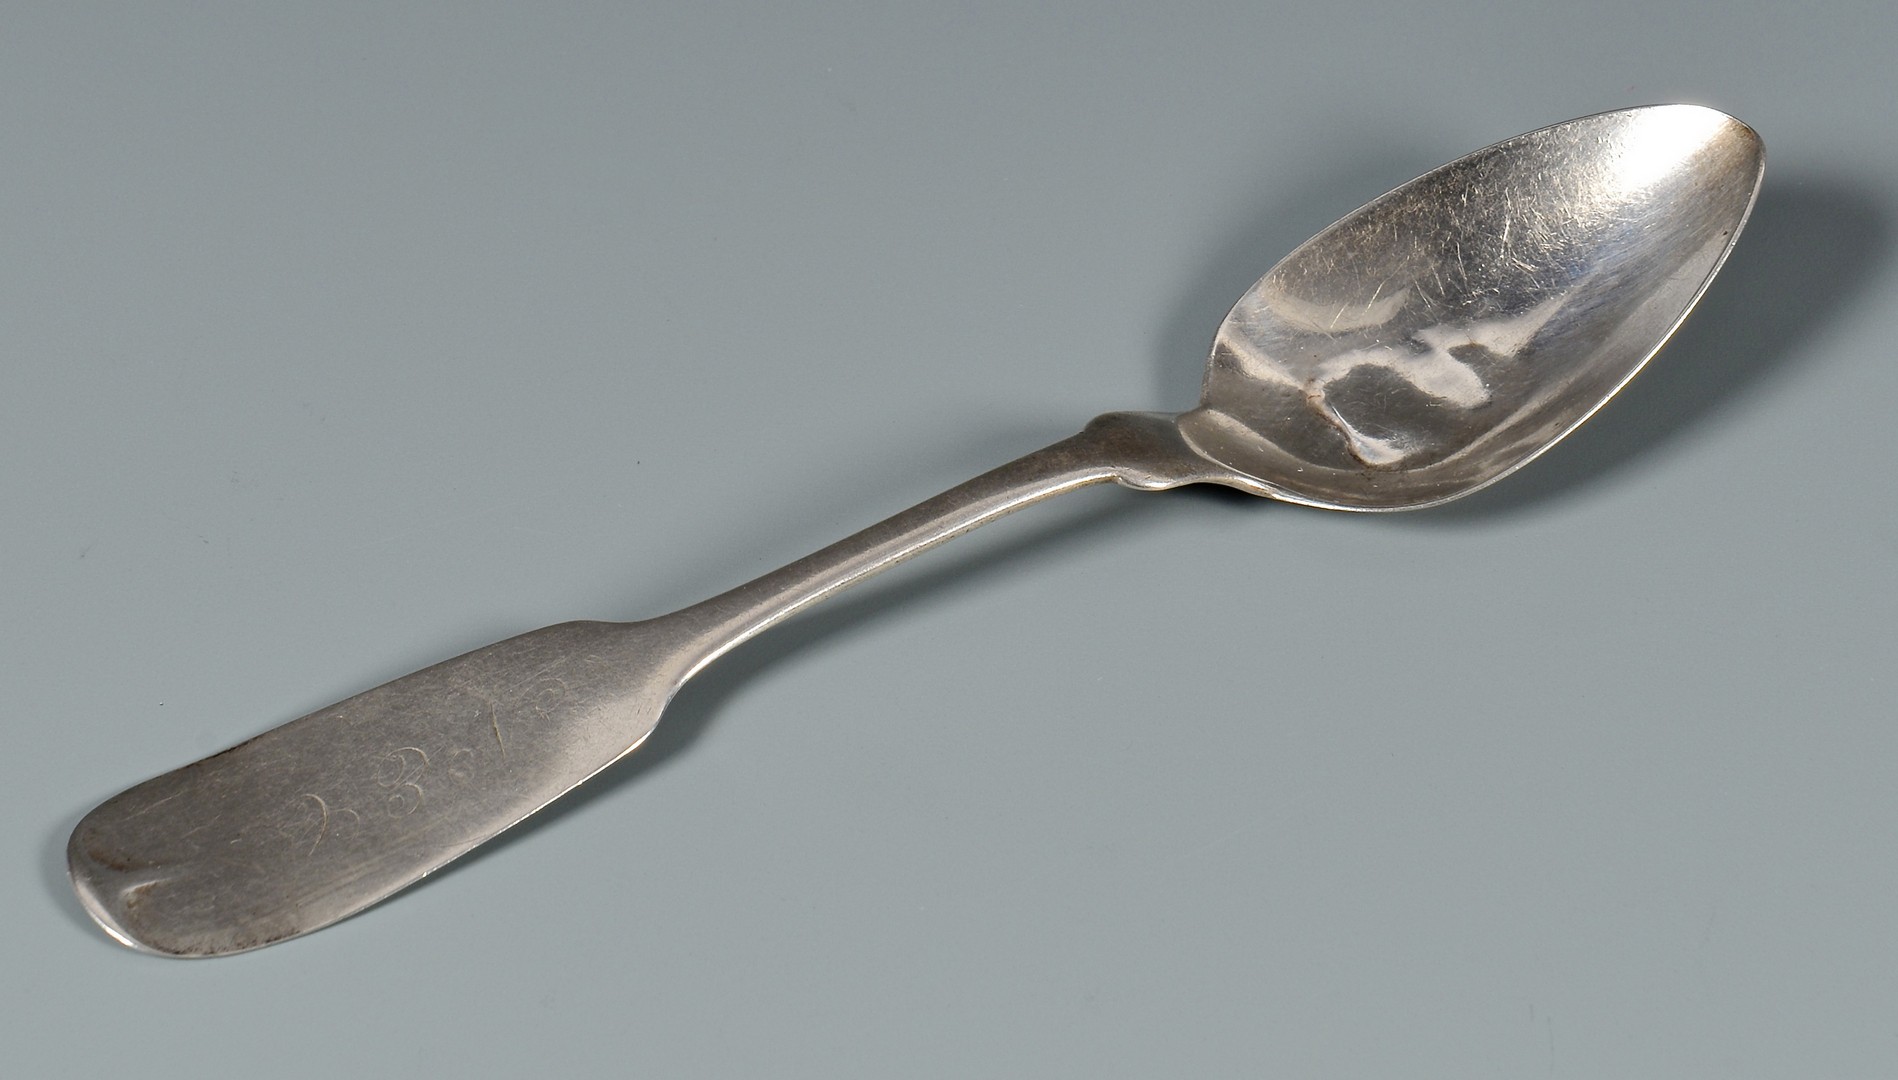 Lot 56: Alabama Silver Ladle and Spoon